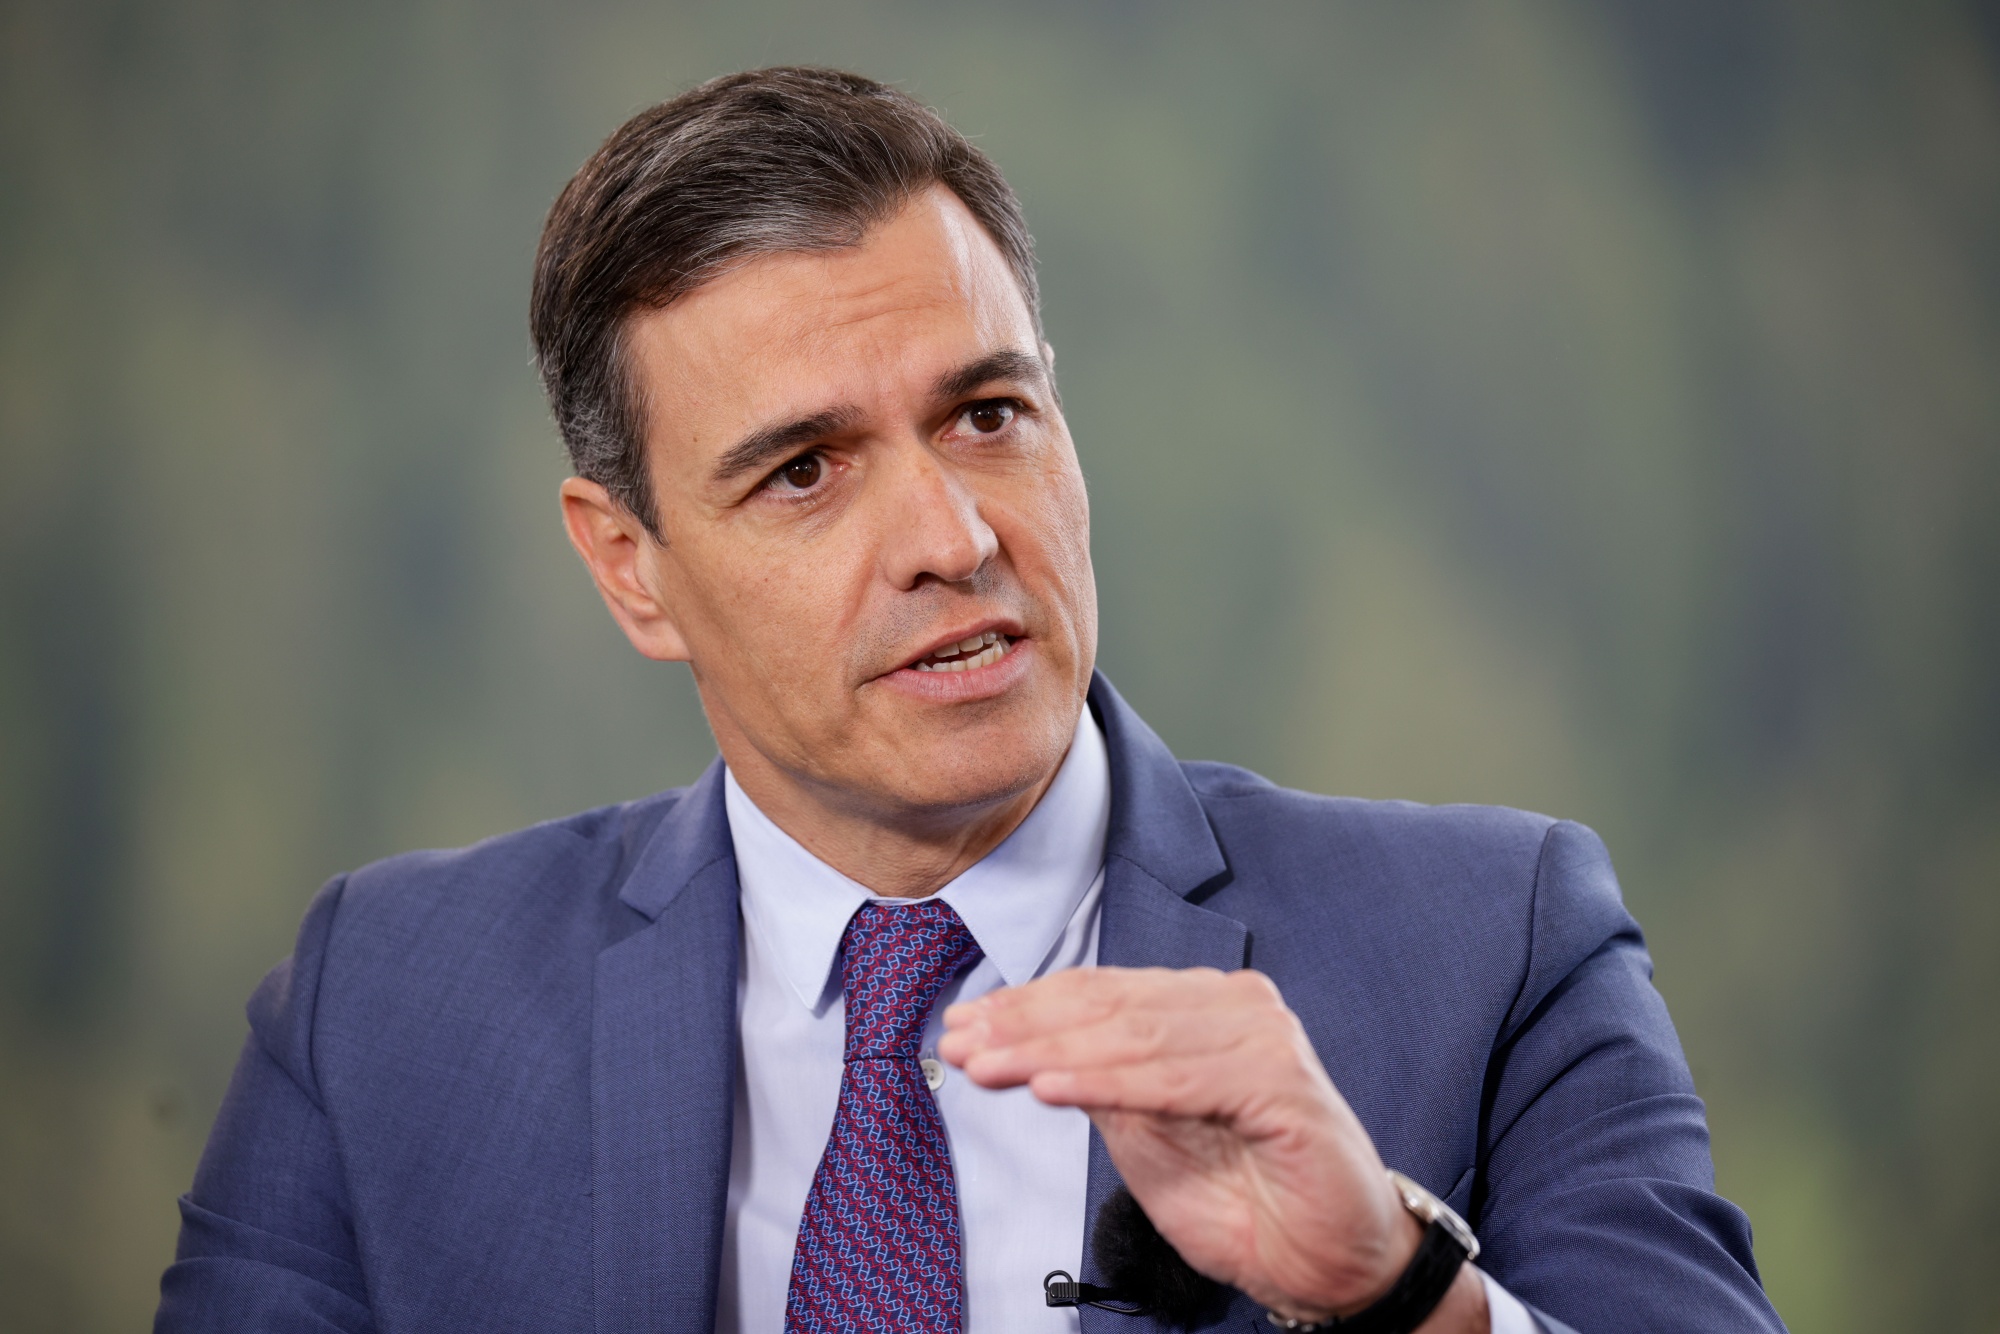 Spanish Prime Minister Set for Heavy Defeat in Key Battleground - Bloomberg